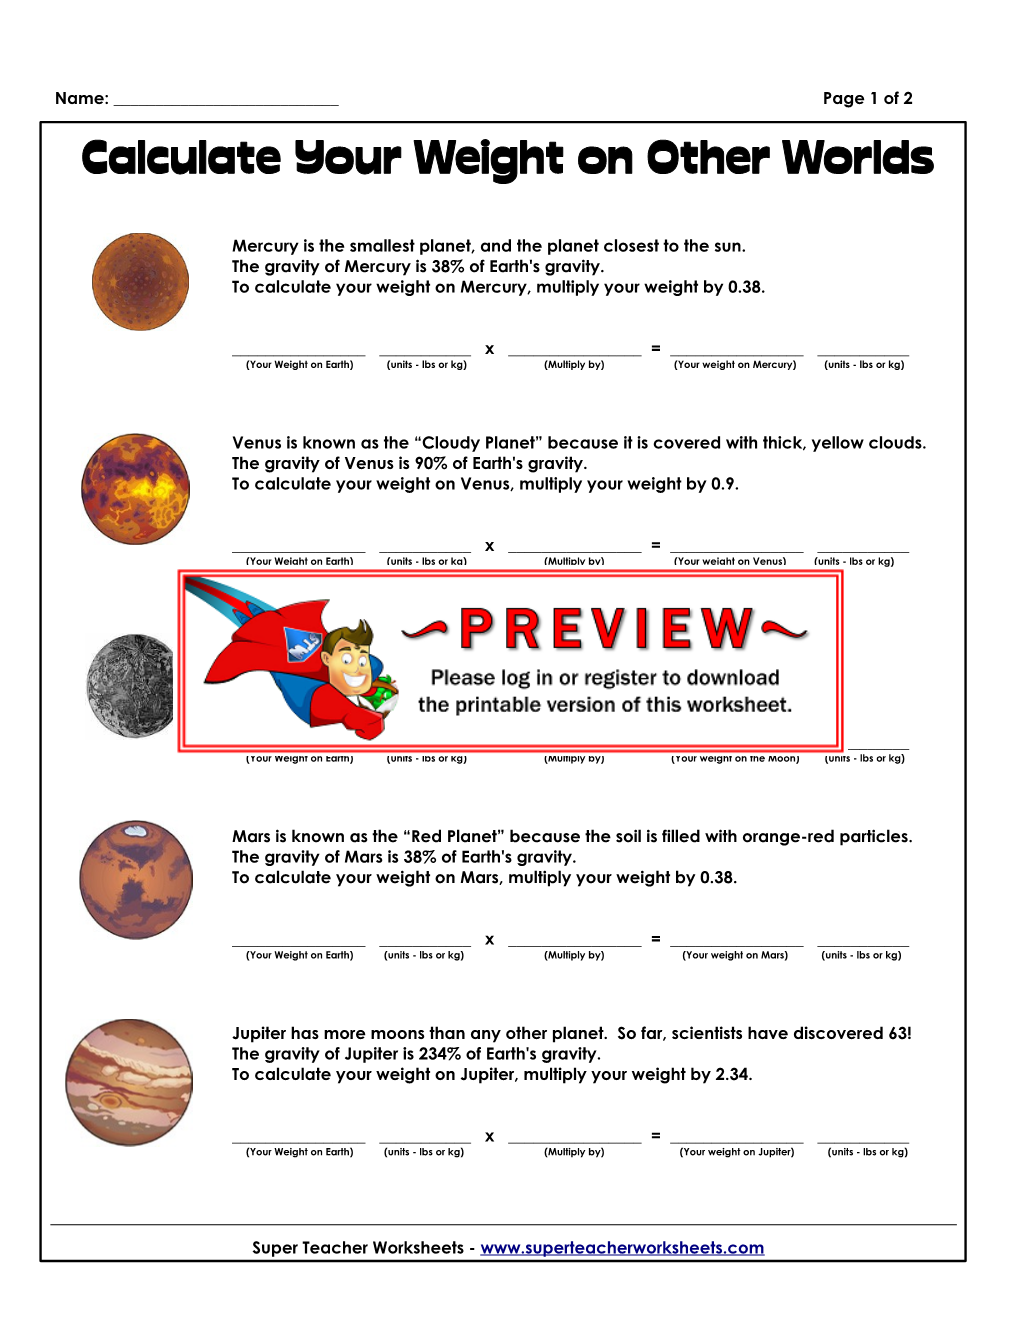 Calculate Your Weight on Other Planets